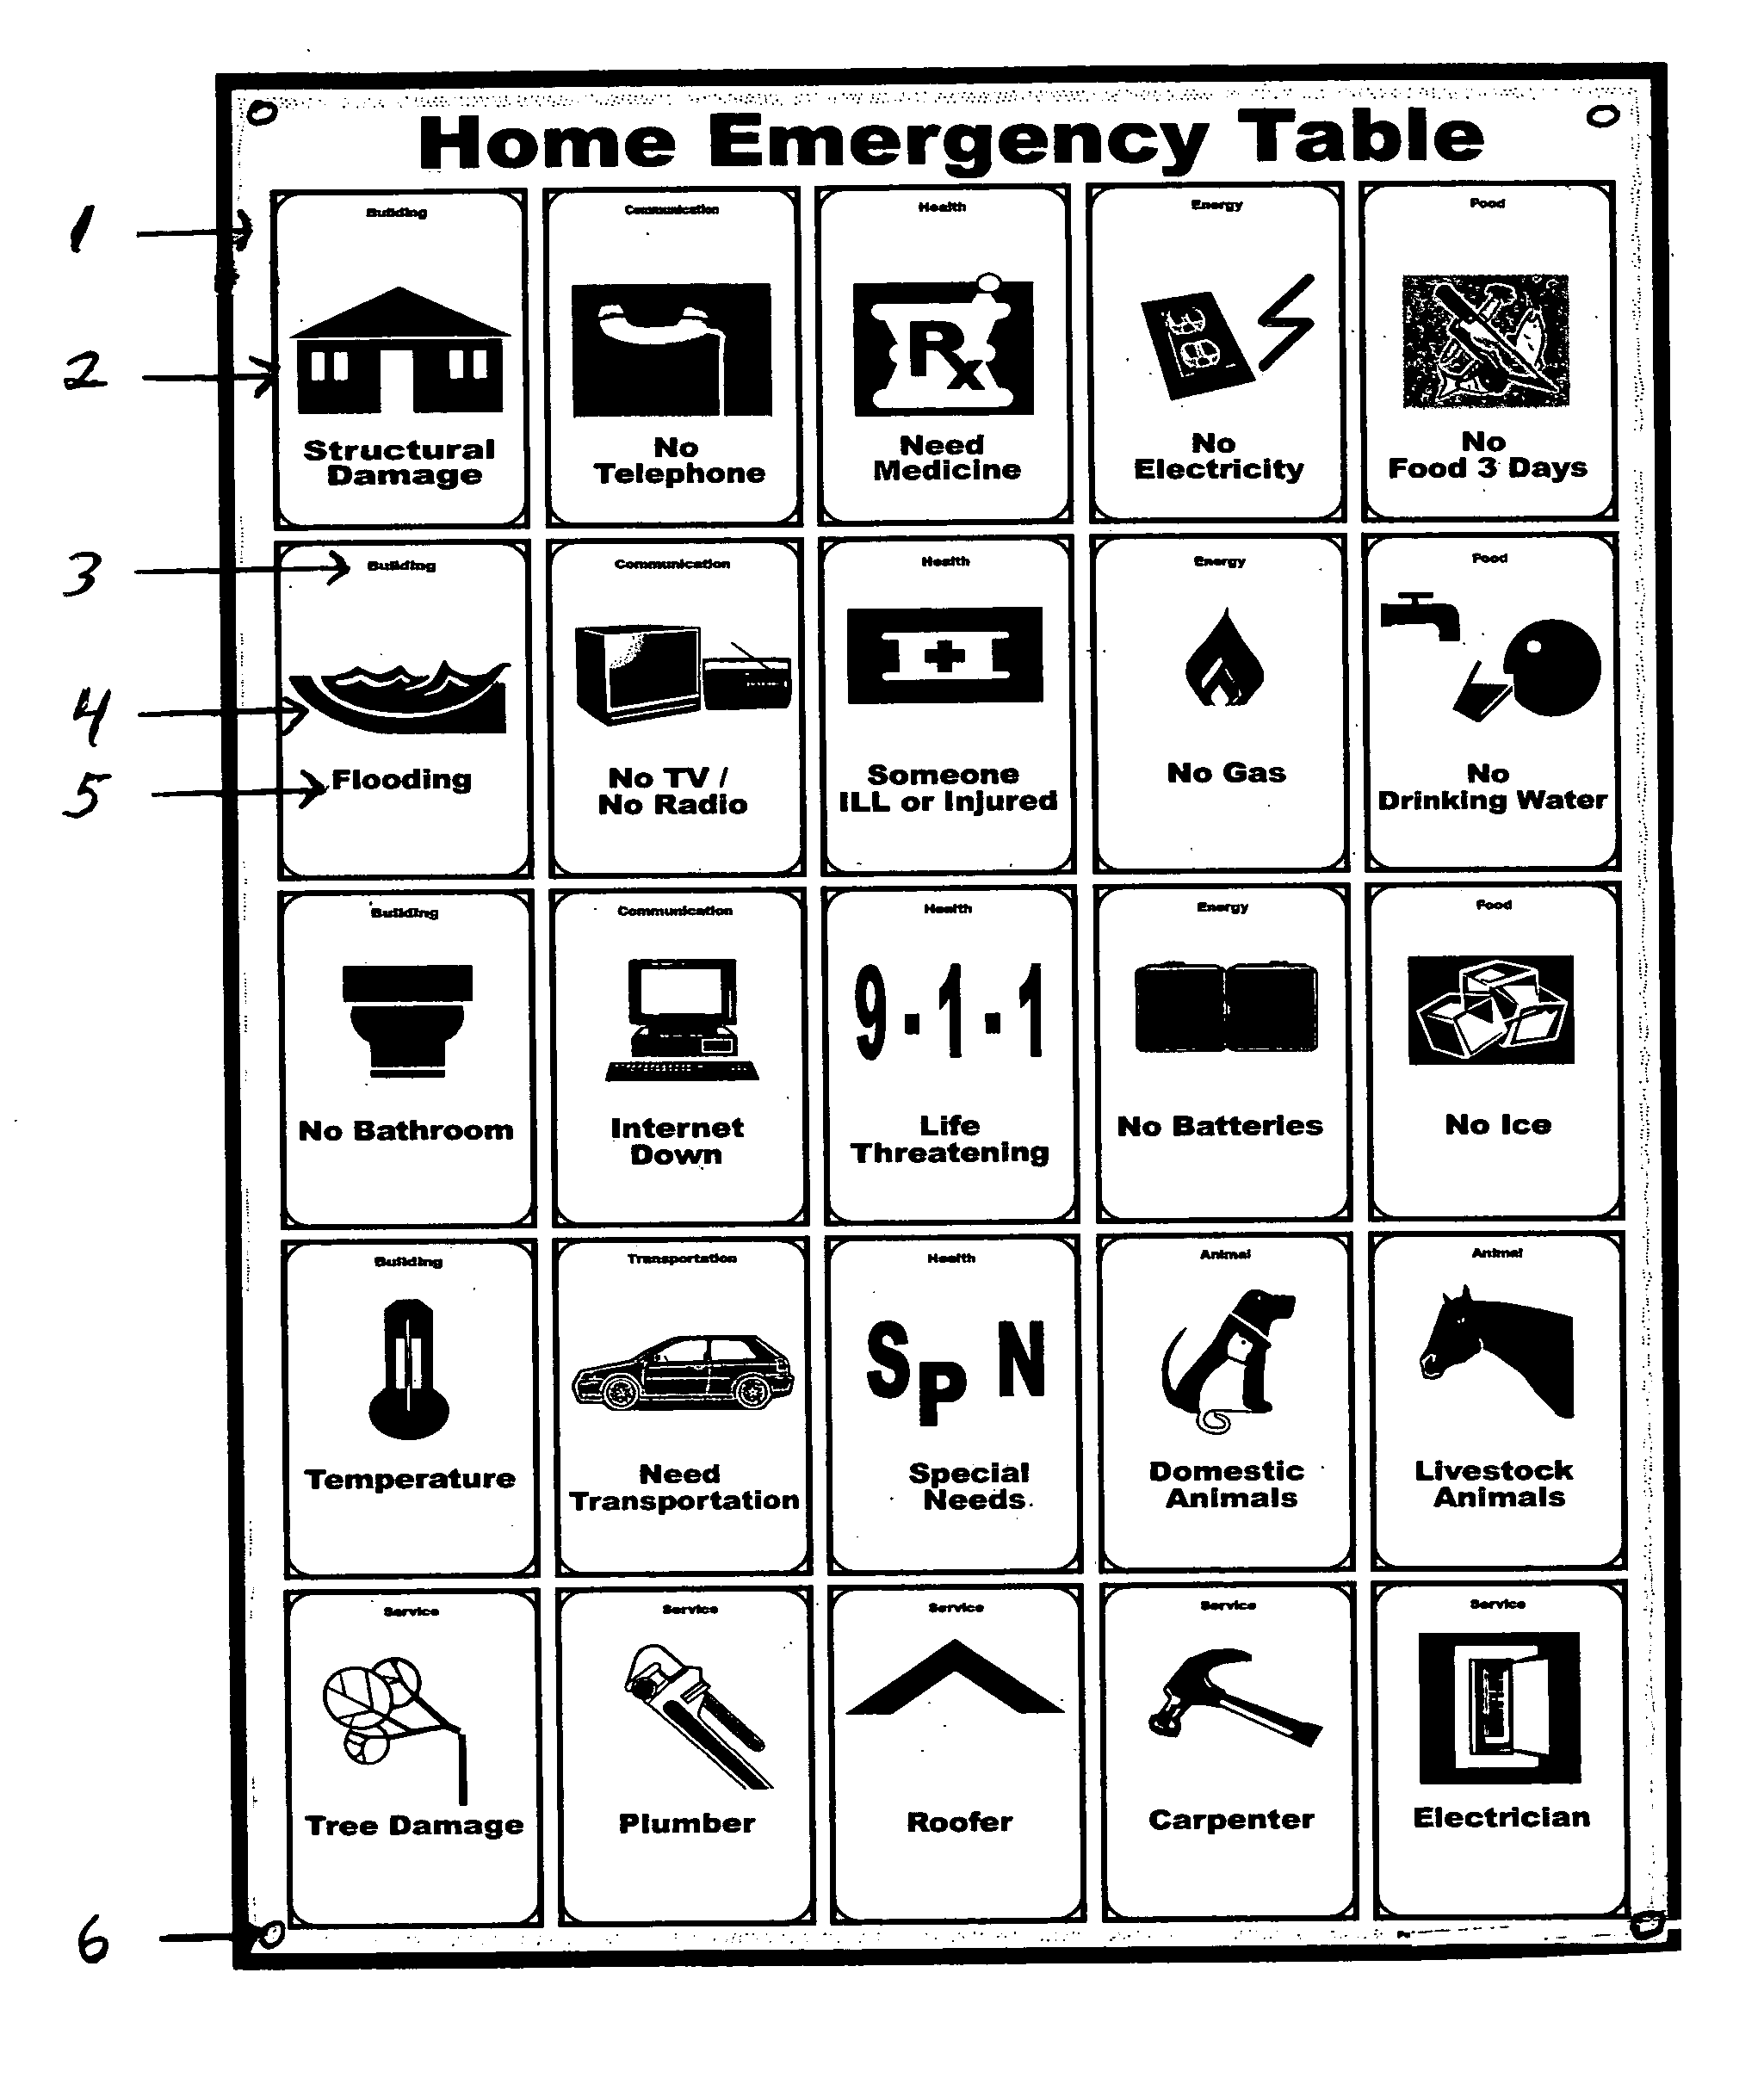 Home emergency sign - the home emergency table (HET)